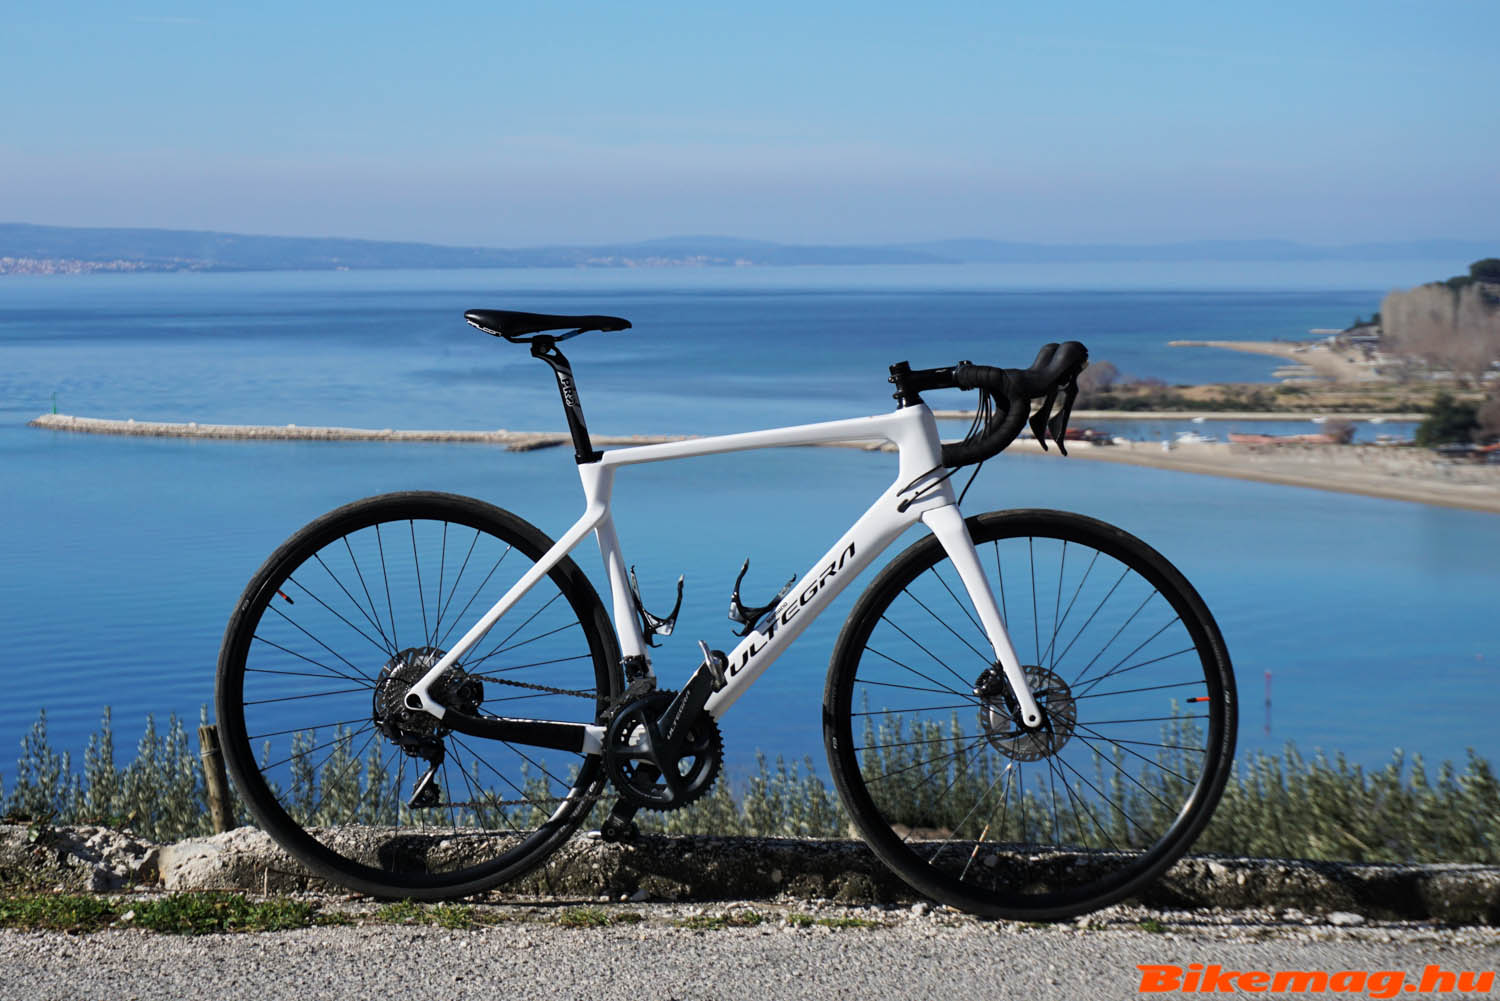 Shimano Ultegra R8000 Review: With disc brakes to overcome the